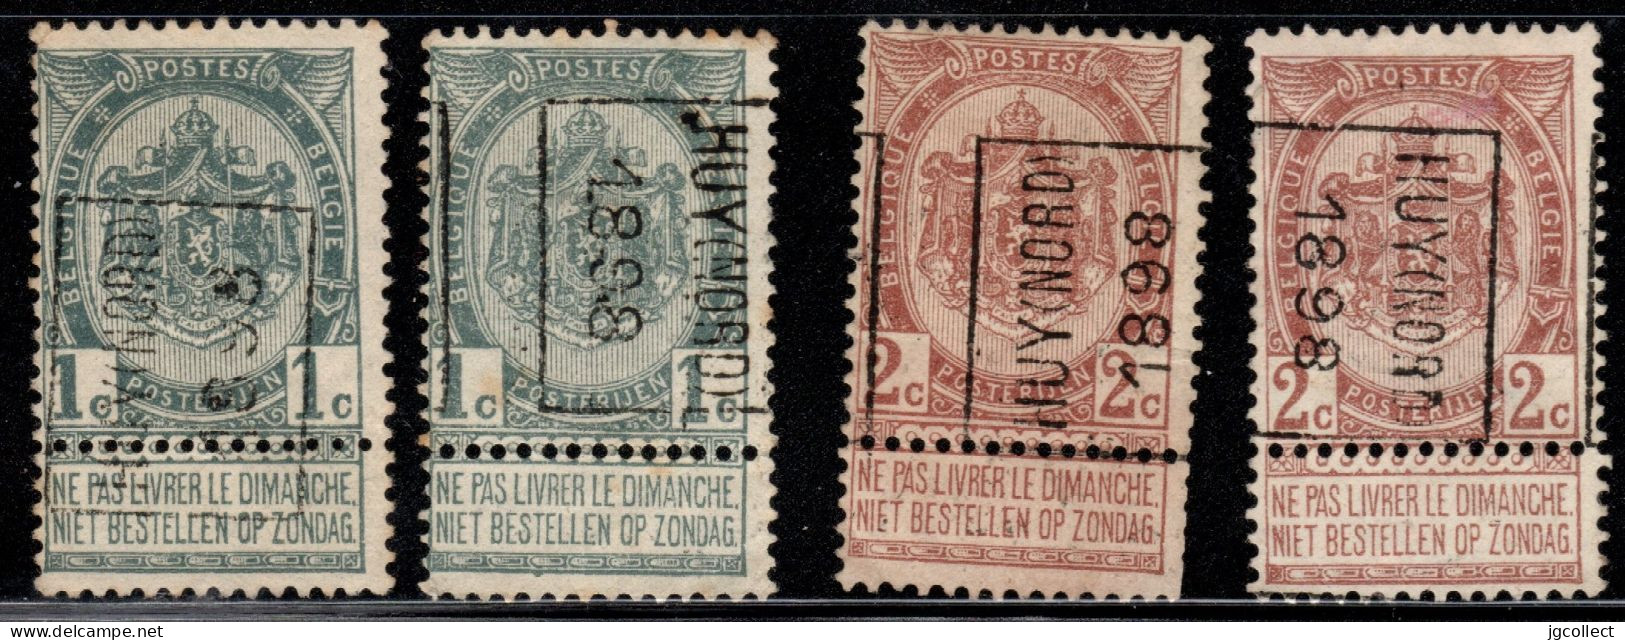 Preo's (53 & 55) "HUY (NORD) 1898" OCVB 149 & 176  A+B - Roulettes 1900-09